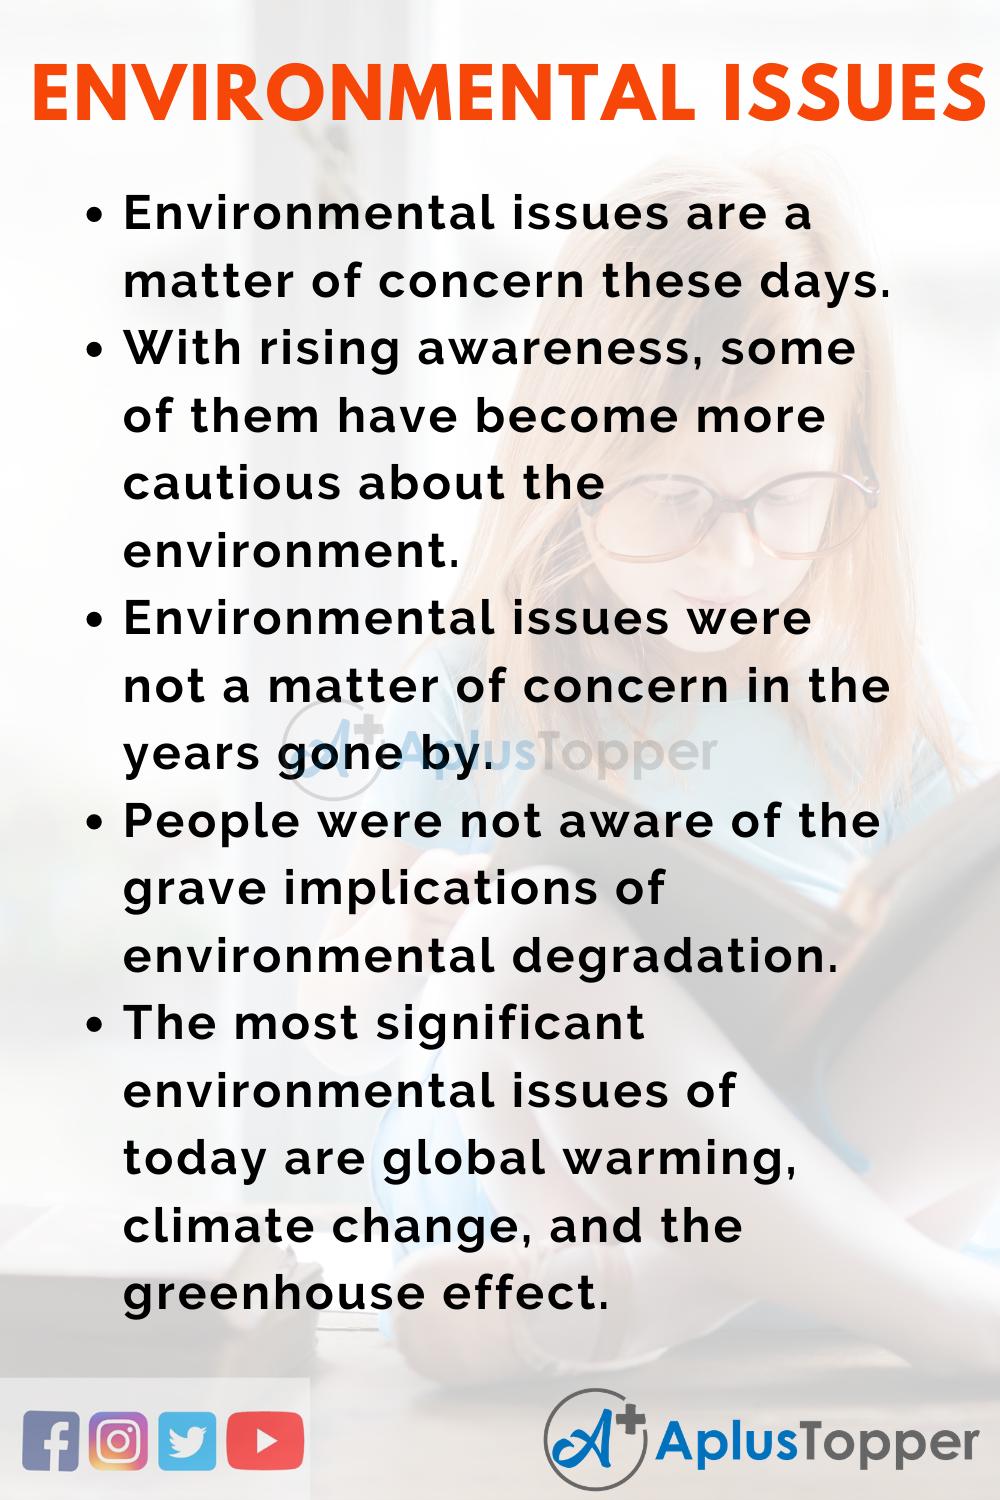 examples of climate change